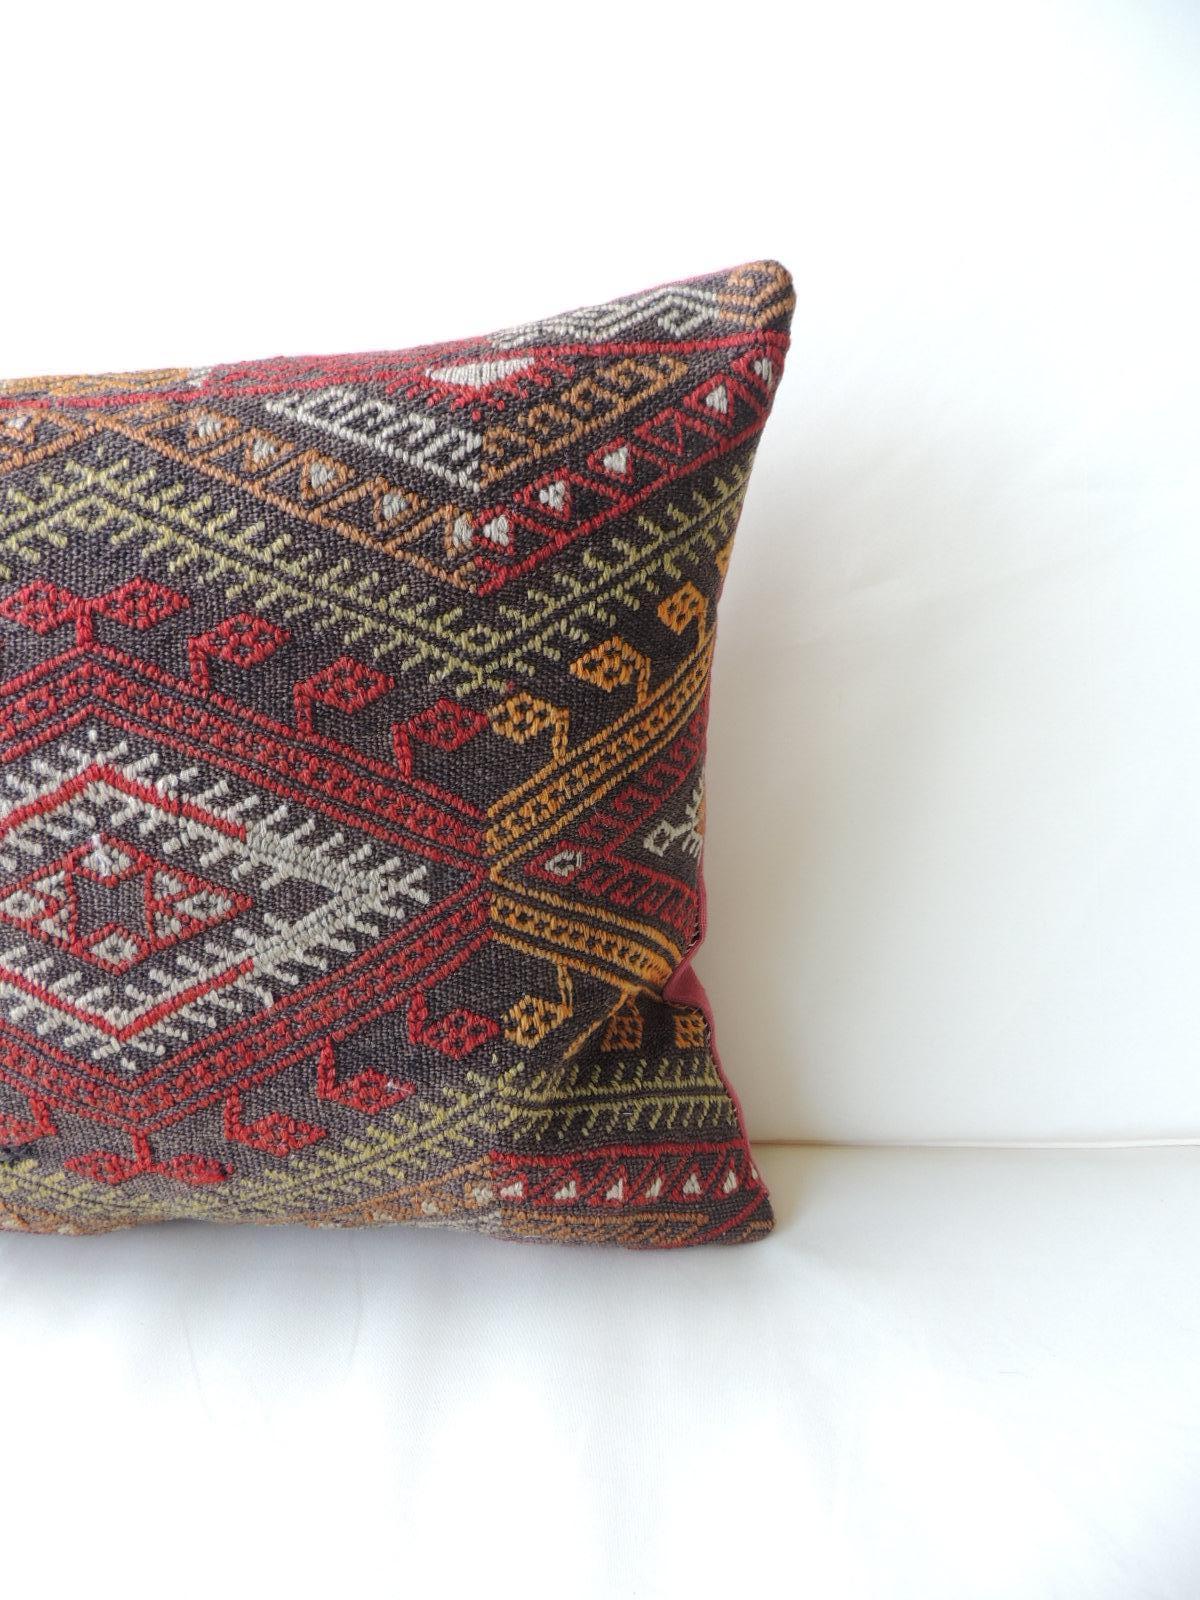 Vintage red and orange woven Kilim bolster decorative pillow
with pinkish linen backing.
Decorative pillow handcrafted and designed in the USA. Closure by stitch (no zipper closure) with custom made pillow insert.
In shades of red, grey, black,